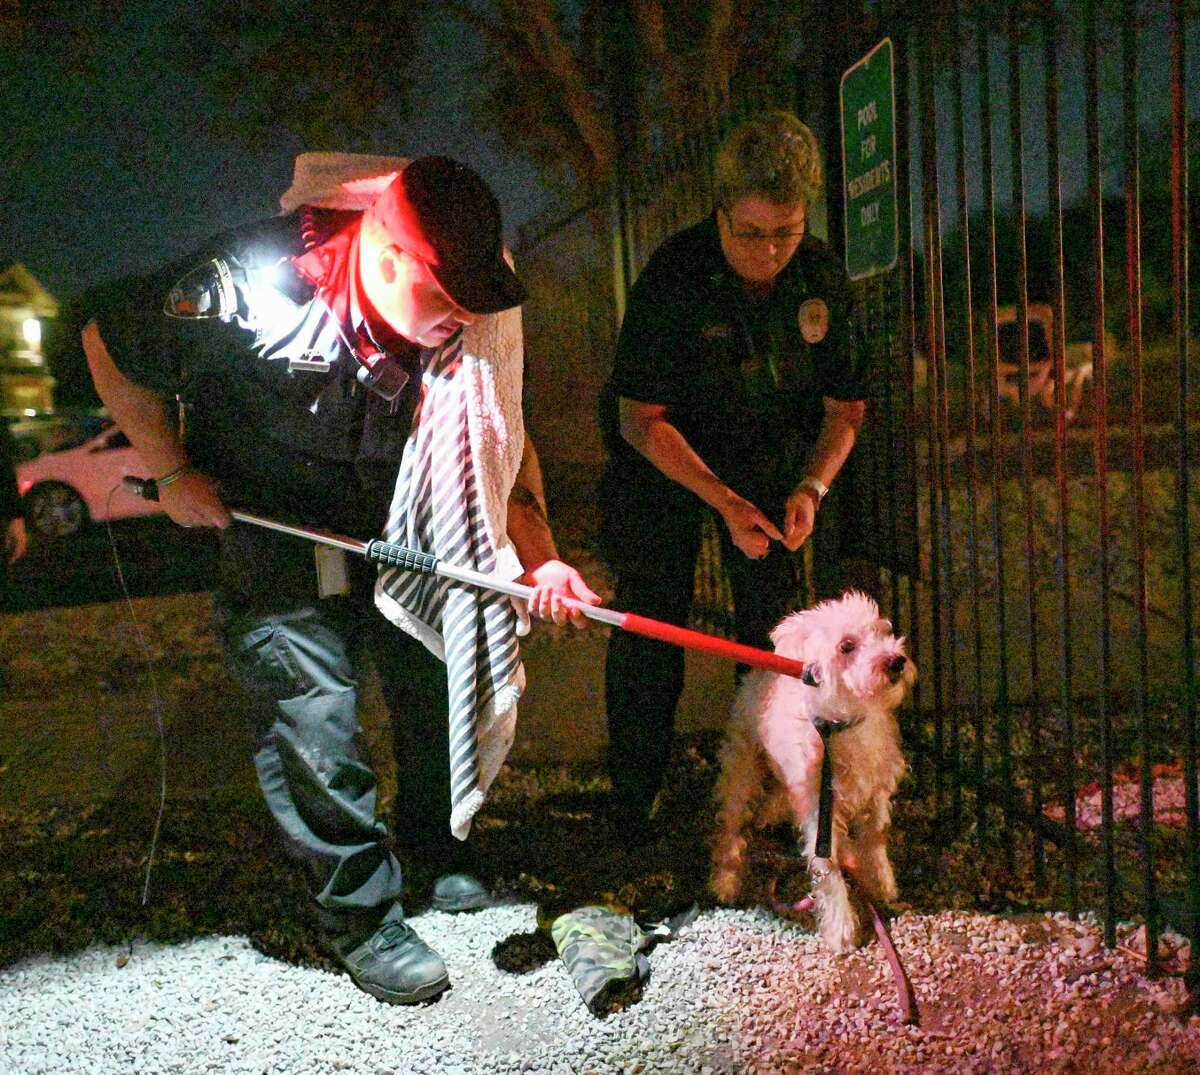 Animal Care Officer Estephen Centeno, left, and Sgt. Melissa Smith restrain a dog they named “Mikey” as they remove him from fence he was tied to at an apartment complex on Timber View. The dog was unwanted and left there, with food and water.